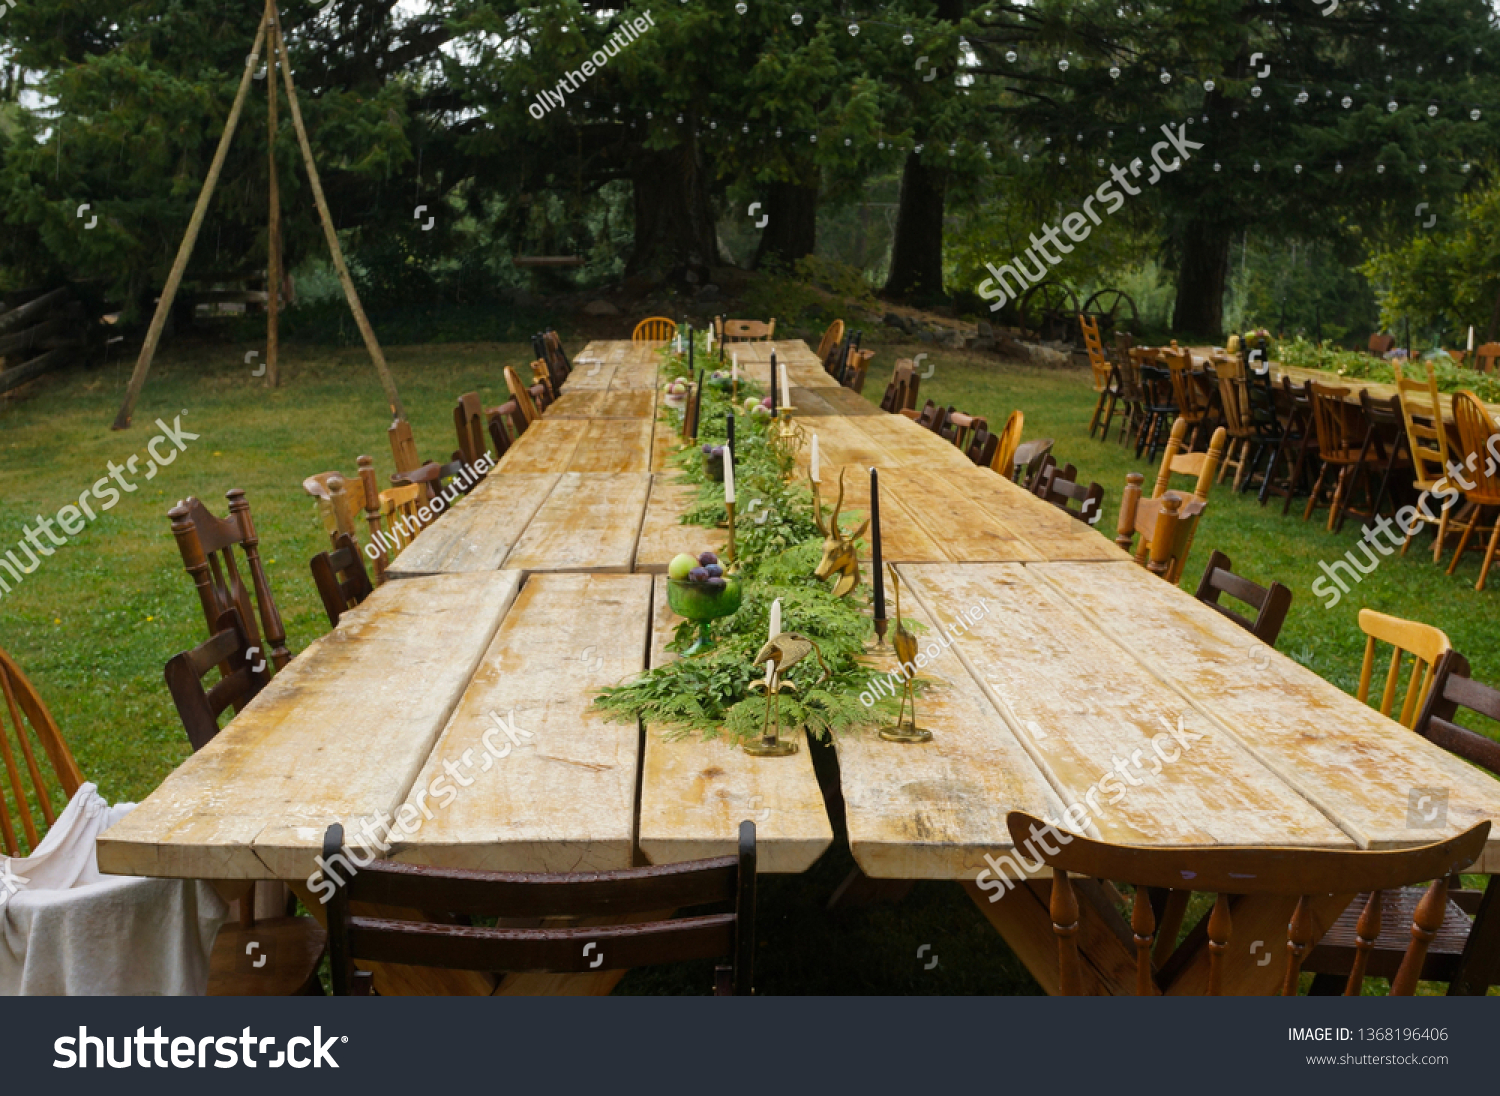 Large Wooden Table Set Outdoor Wedding Stock Photo Edit Now 1368196406